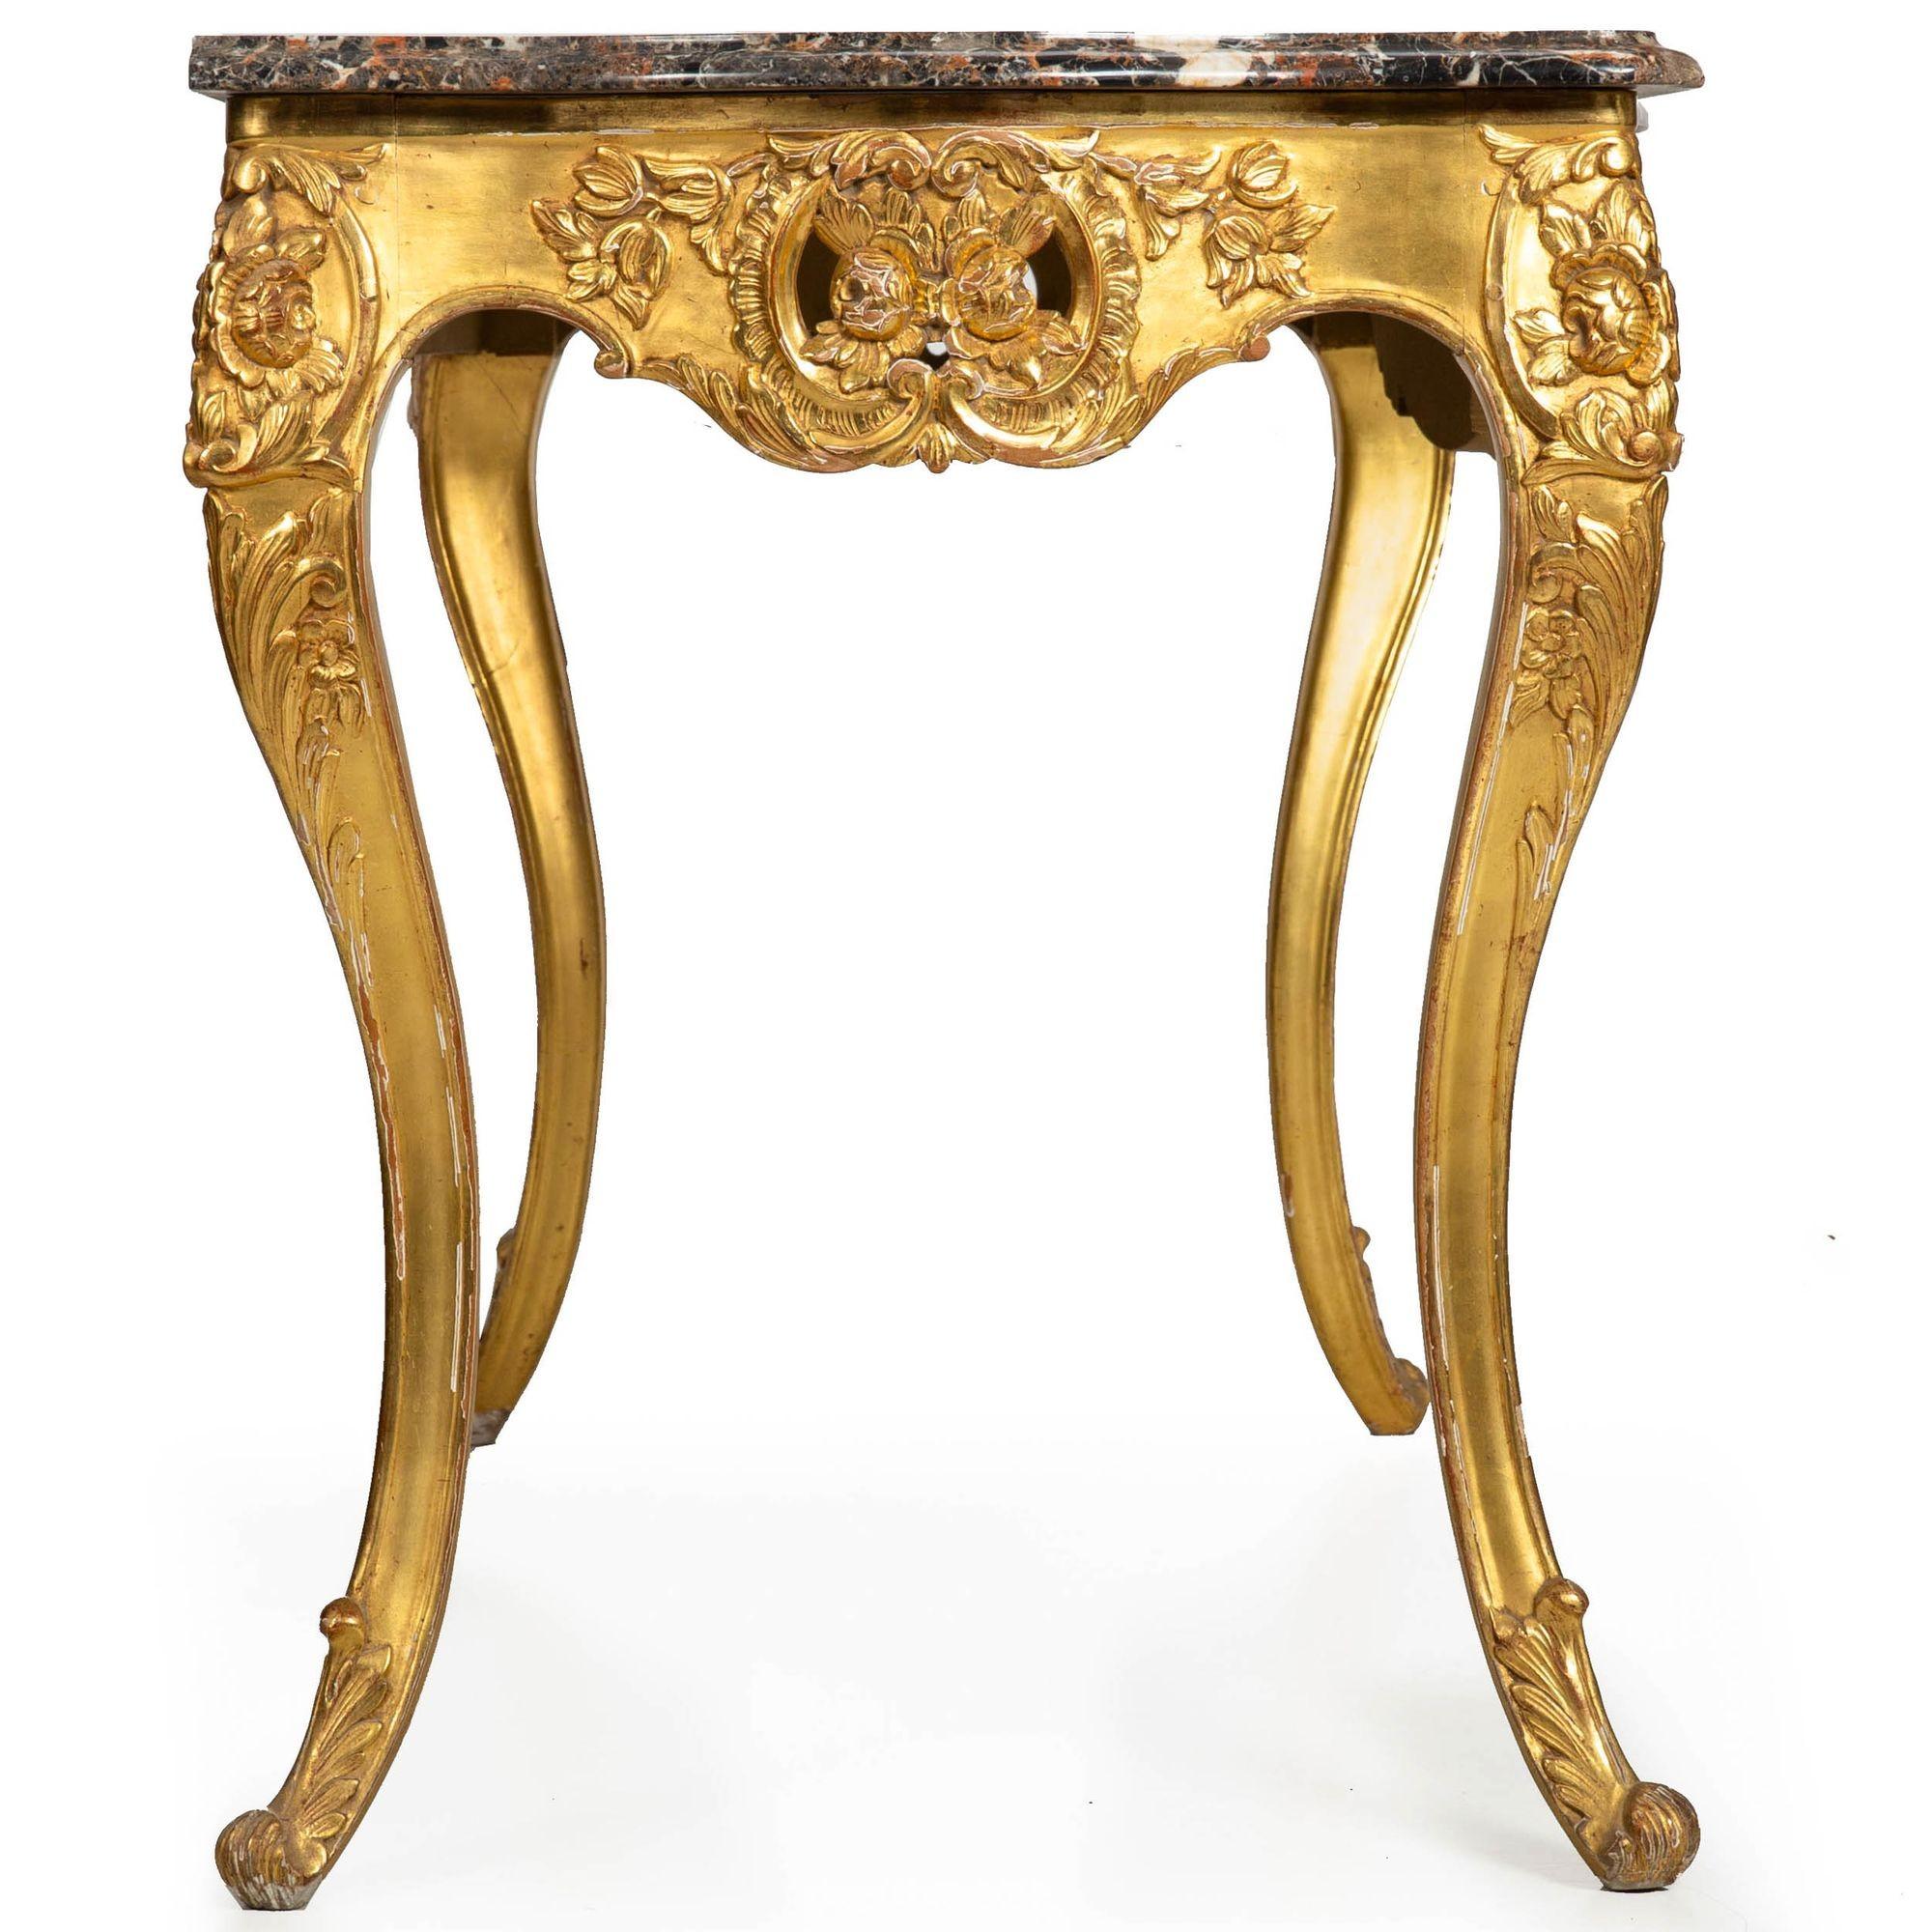 20th Century French Louis XV Style Gilded Marble Top Antique Console Pier Table For Sale